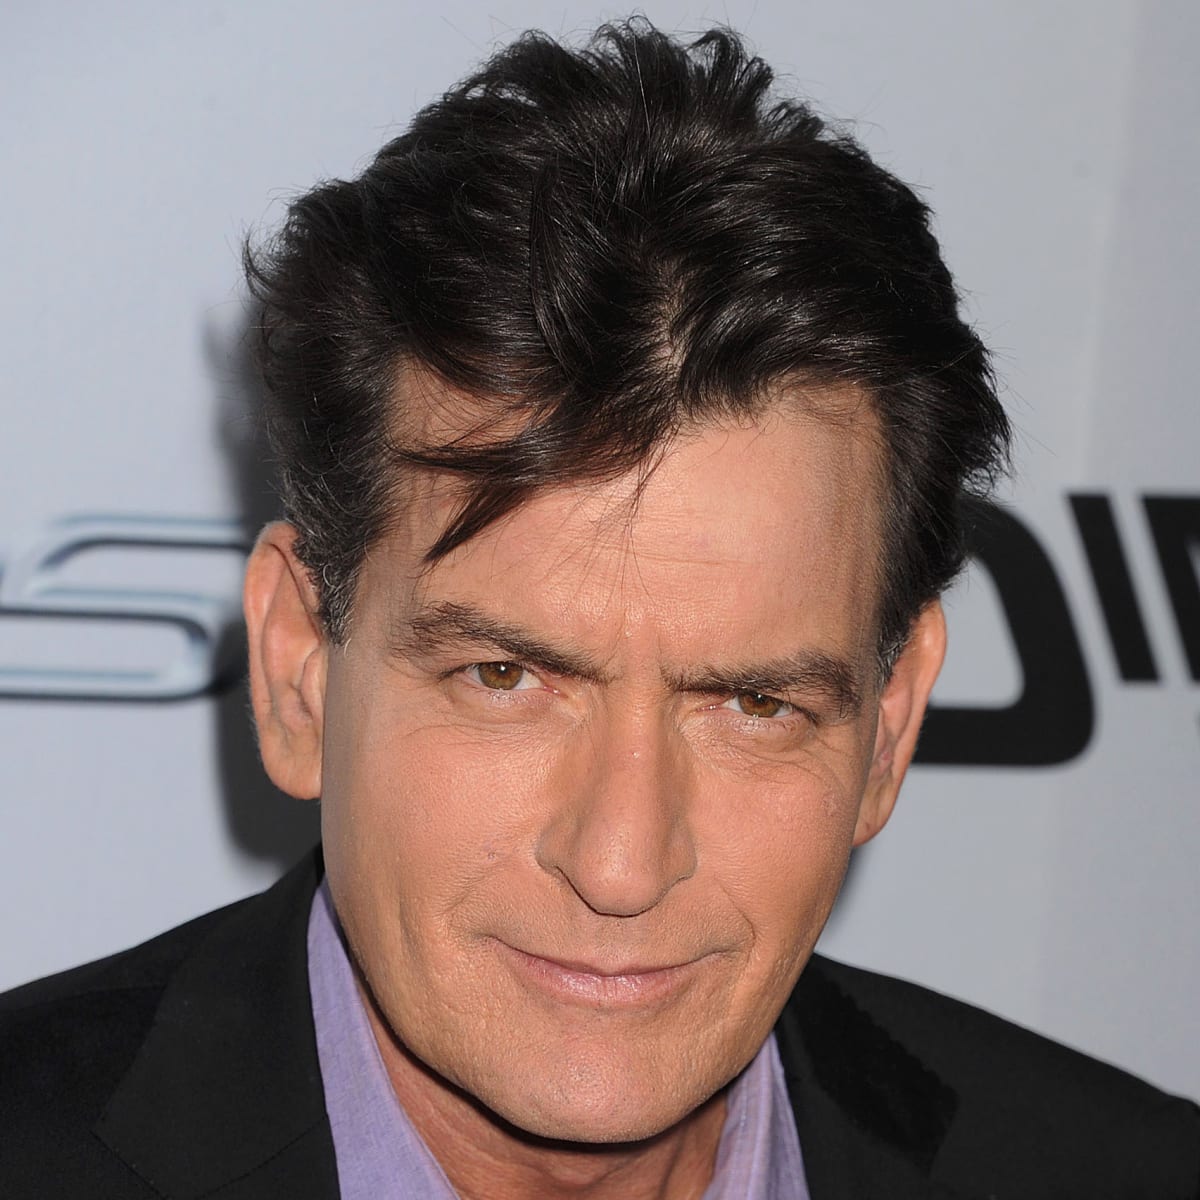 Charlie Sheen Net Worth 2022: How much did Charlie Sheen make Per Episode?